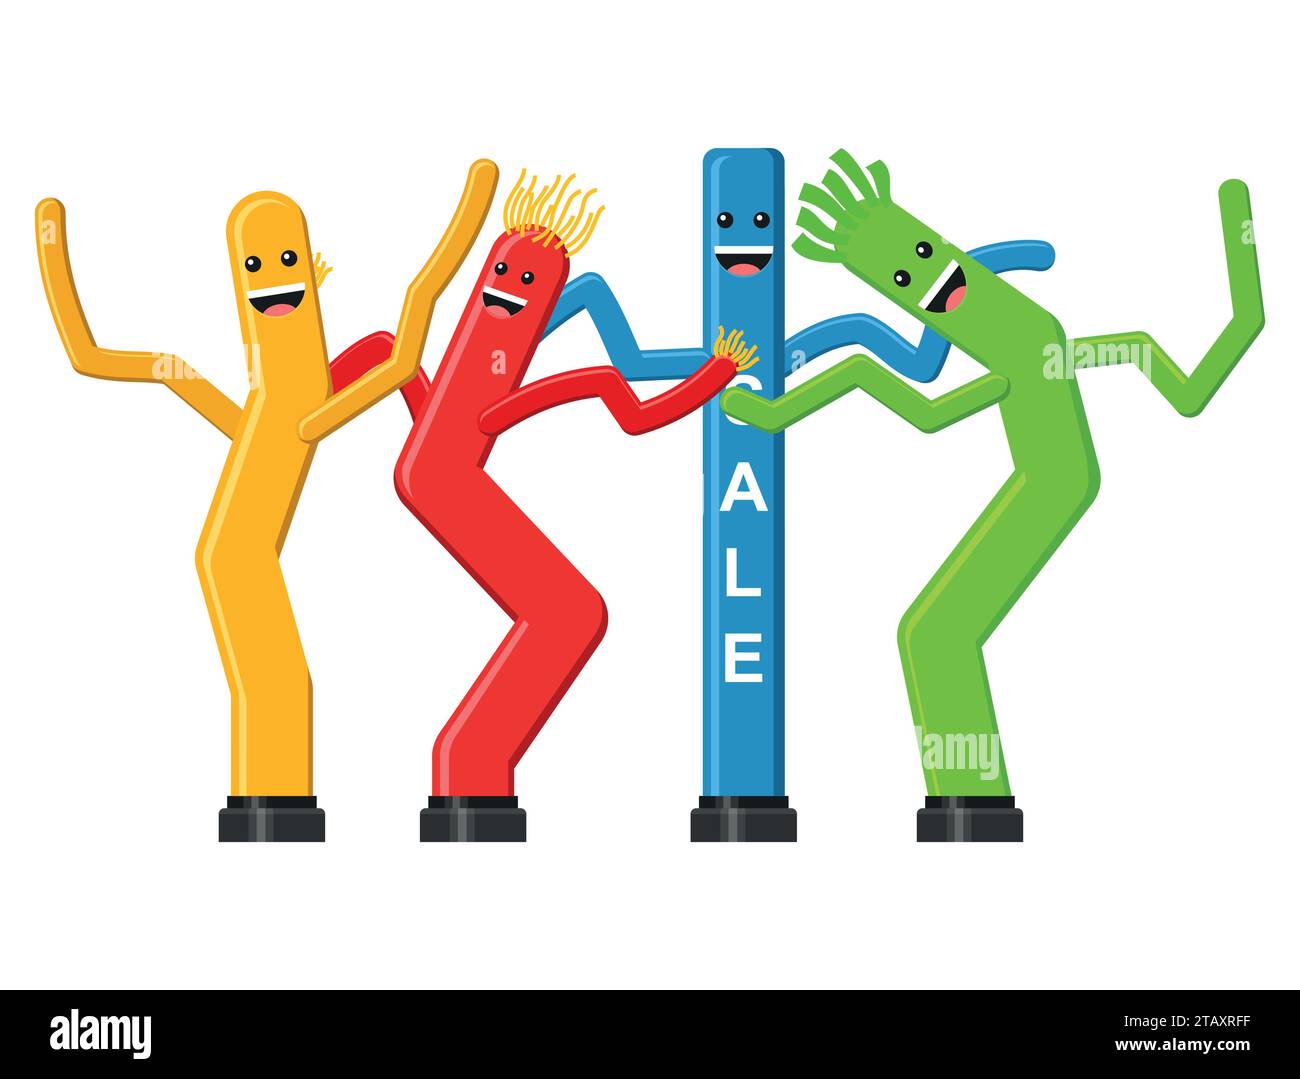 Dancing inflatable tube man set in flat style isolated on white background. Wacky waving air hand for sales and advertising. Vector illustration Stock Vector